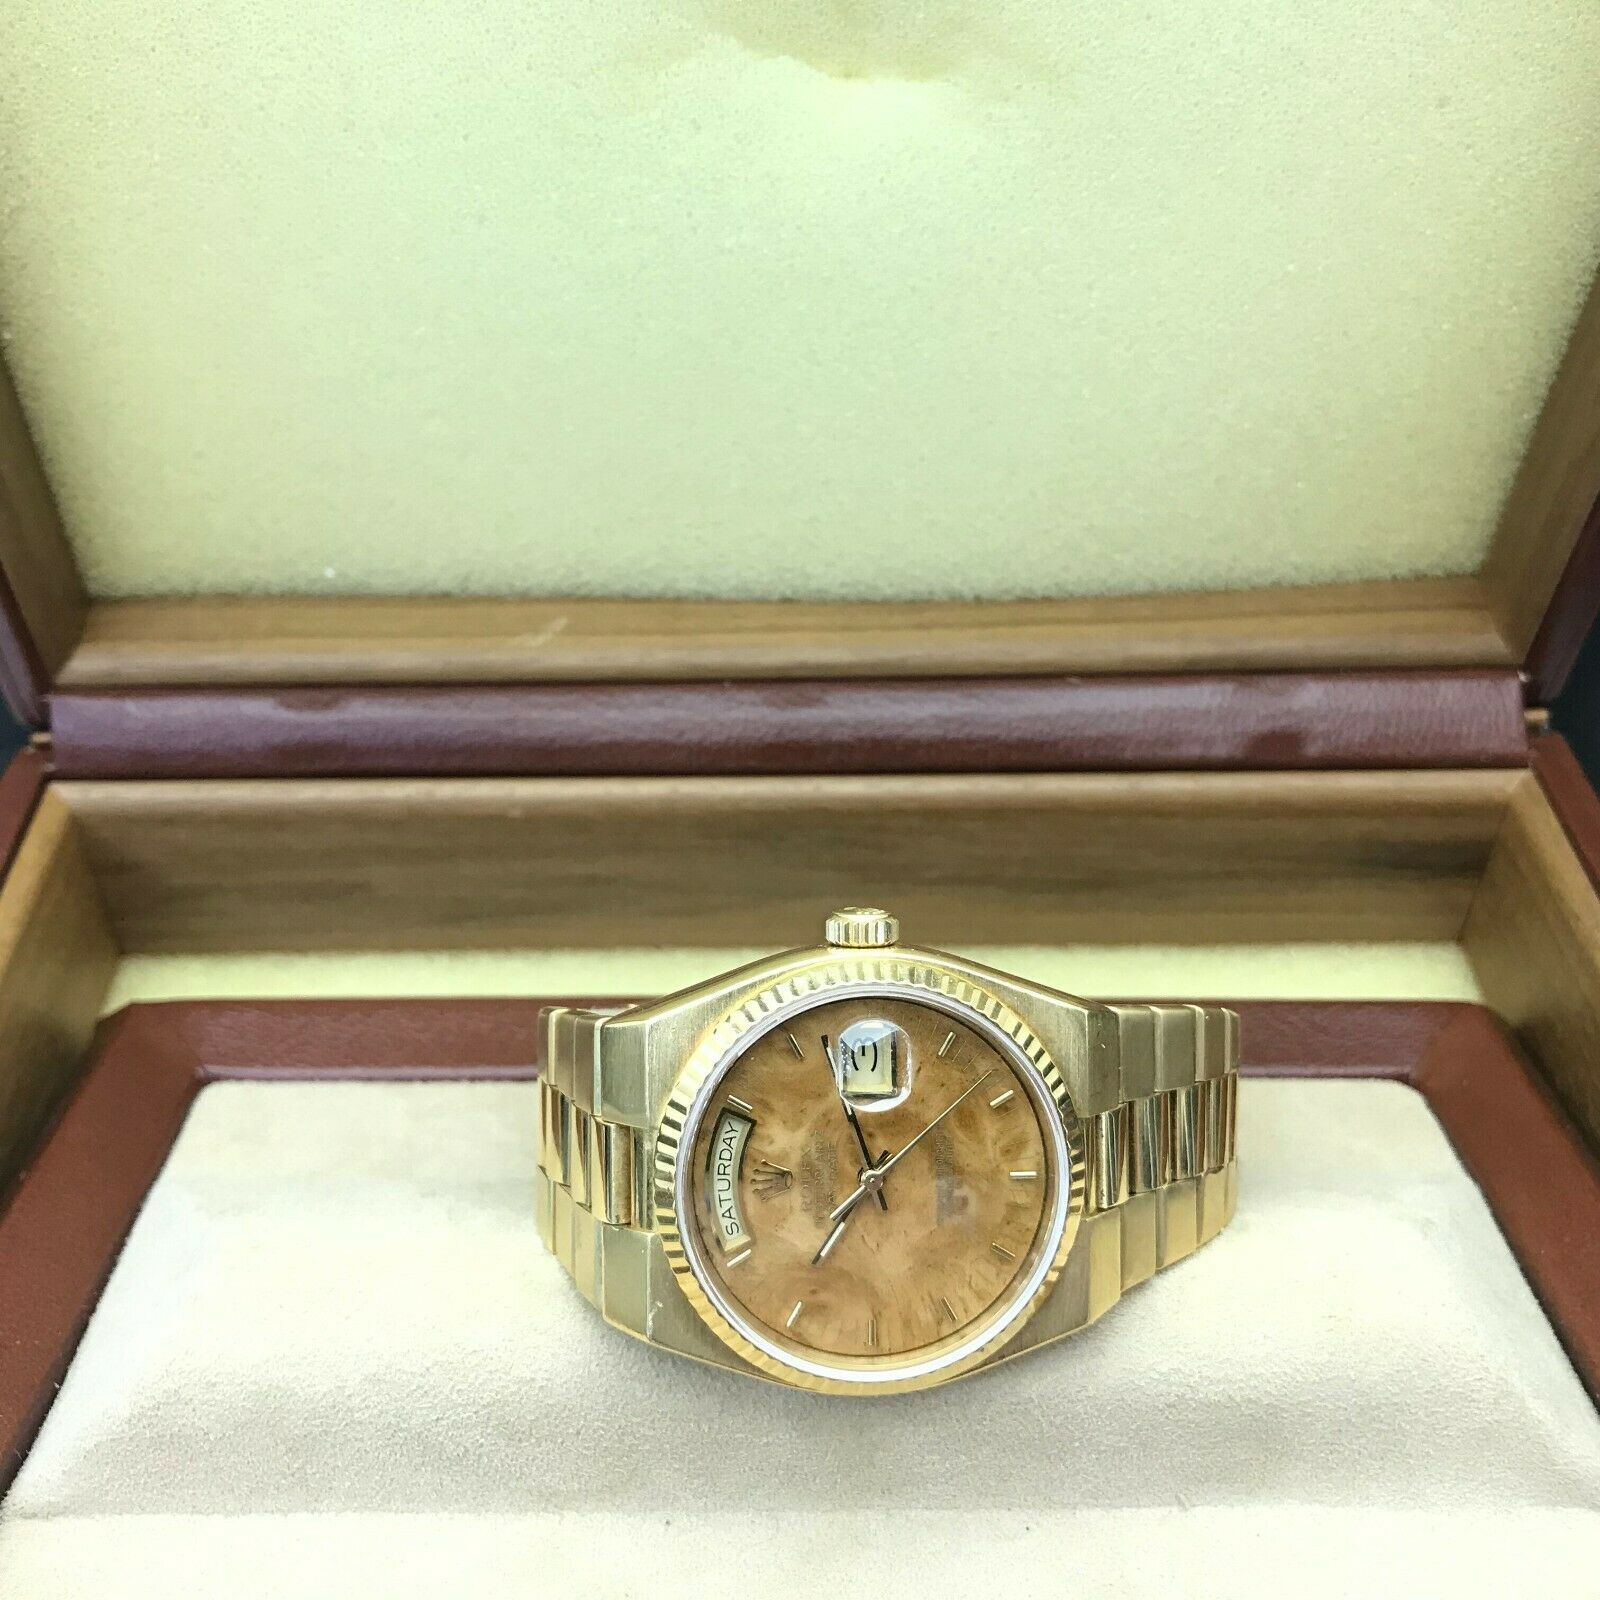 Rolex Day Date President 36mm Exotic Wood Dial Quartz 18k Yellow Gold Ref 19018